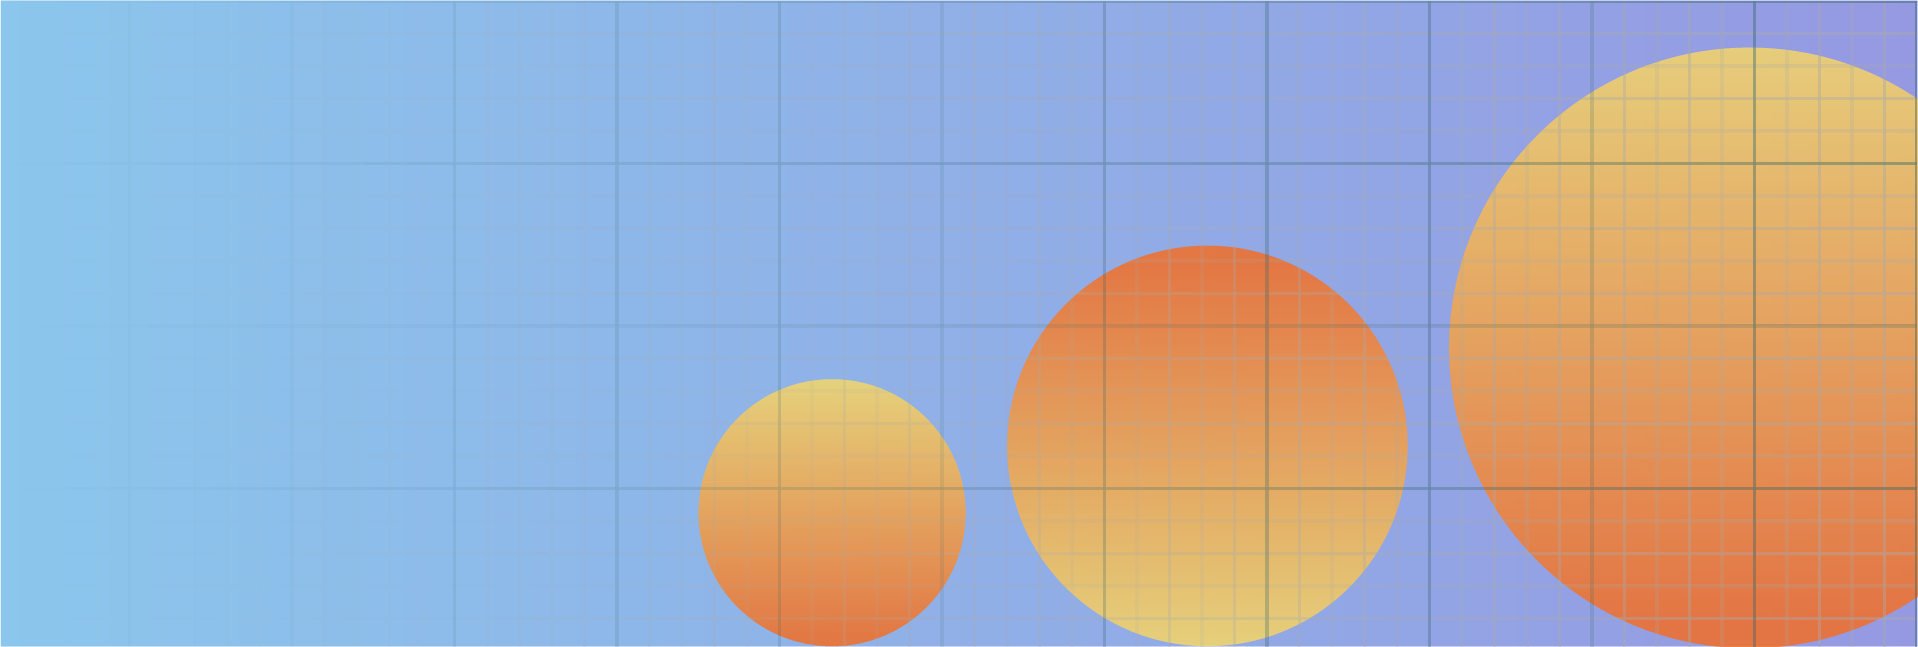 Cover image with 3 orange ever increasing circles sitting next to each other on a blue background